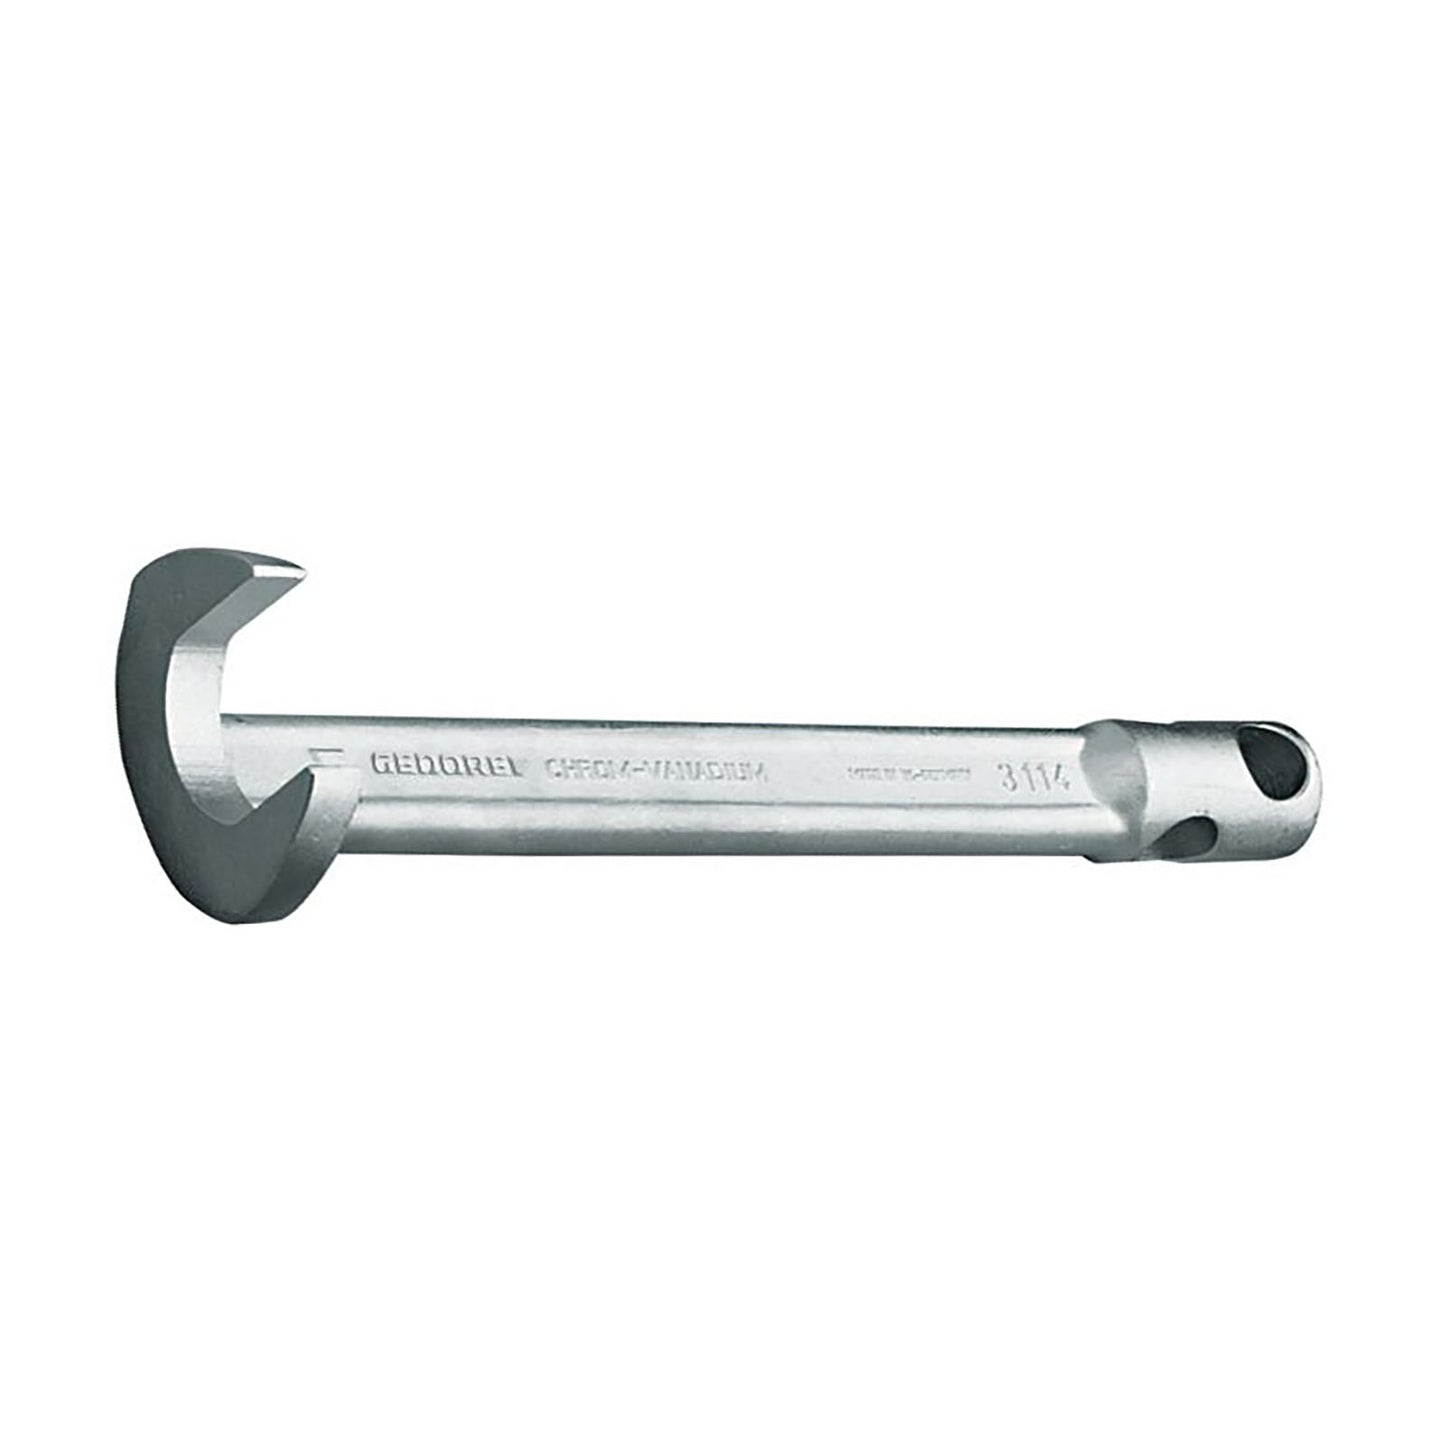 GEDORE 3114 13 - Forked Foot Wrench, 13mm (6670050)